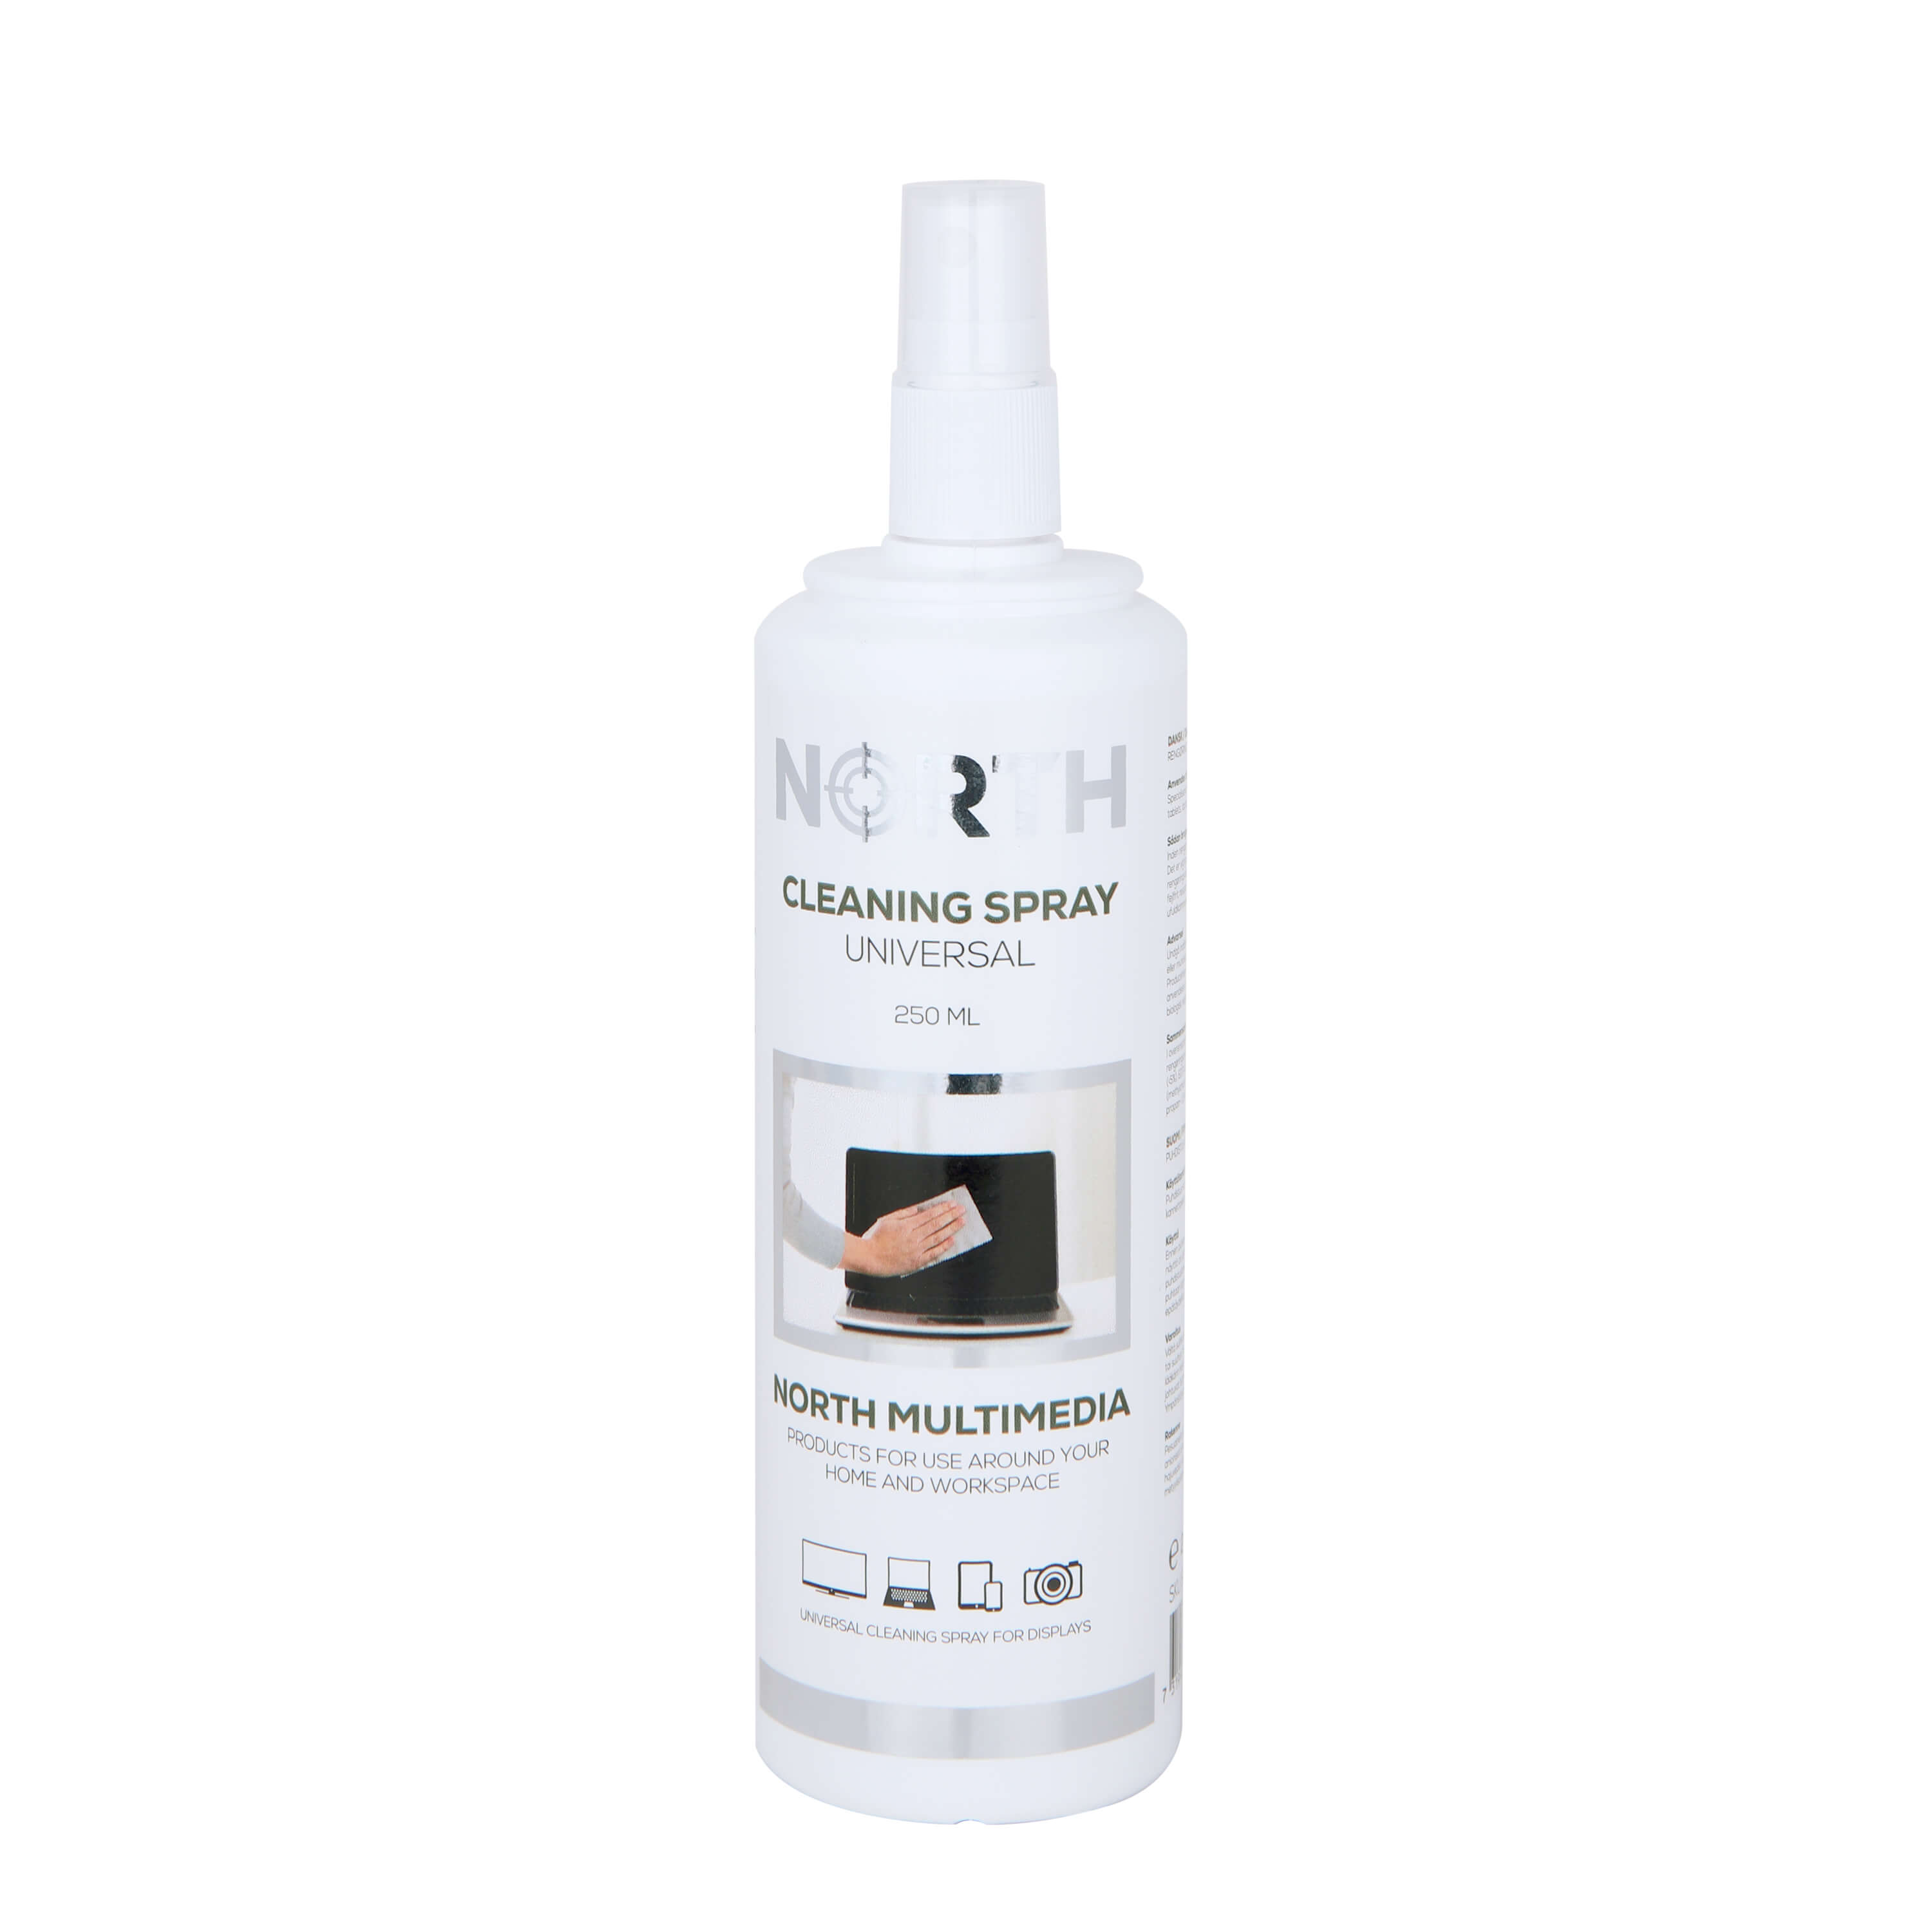 Cleaning kit Universal, Cleaning Spray and Microfiber cloth